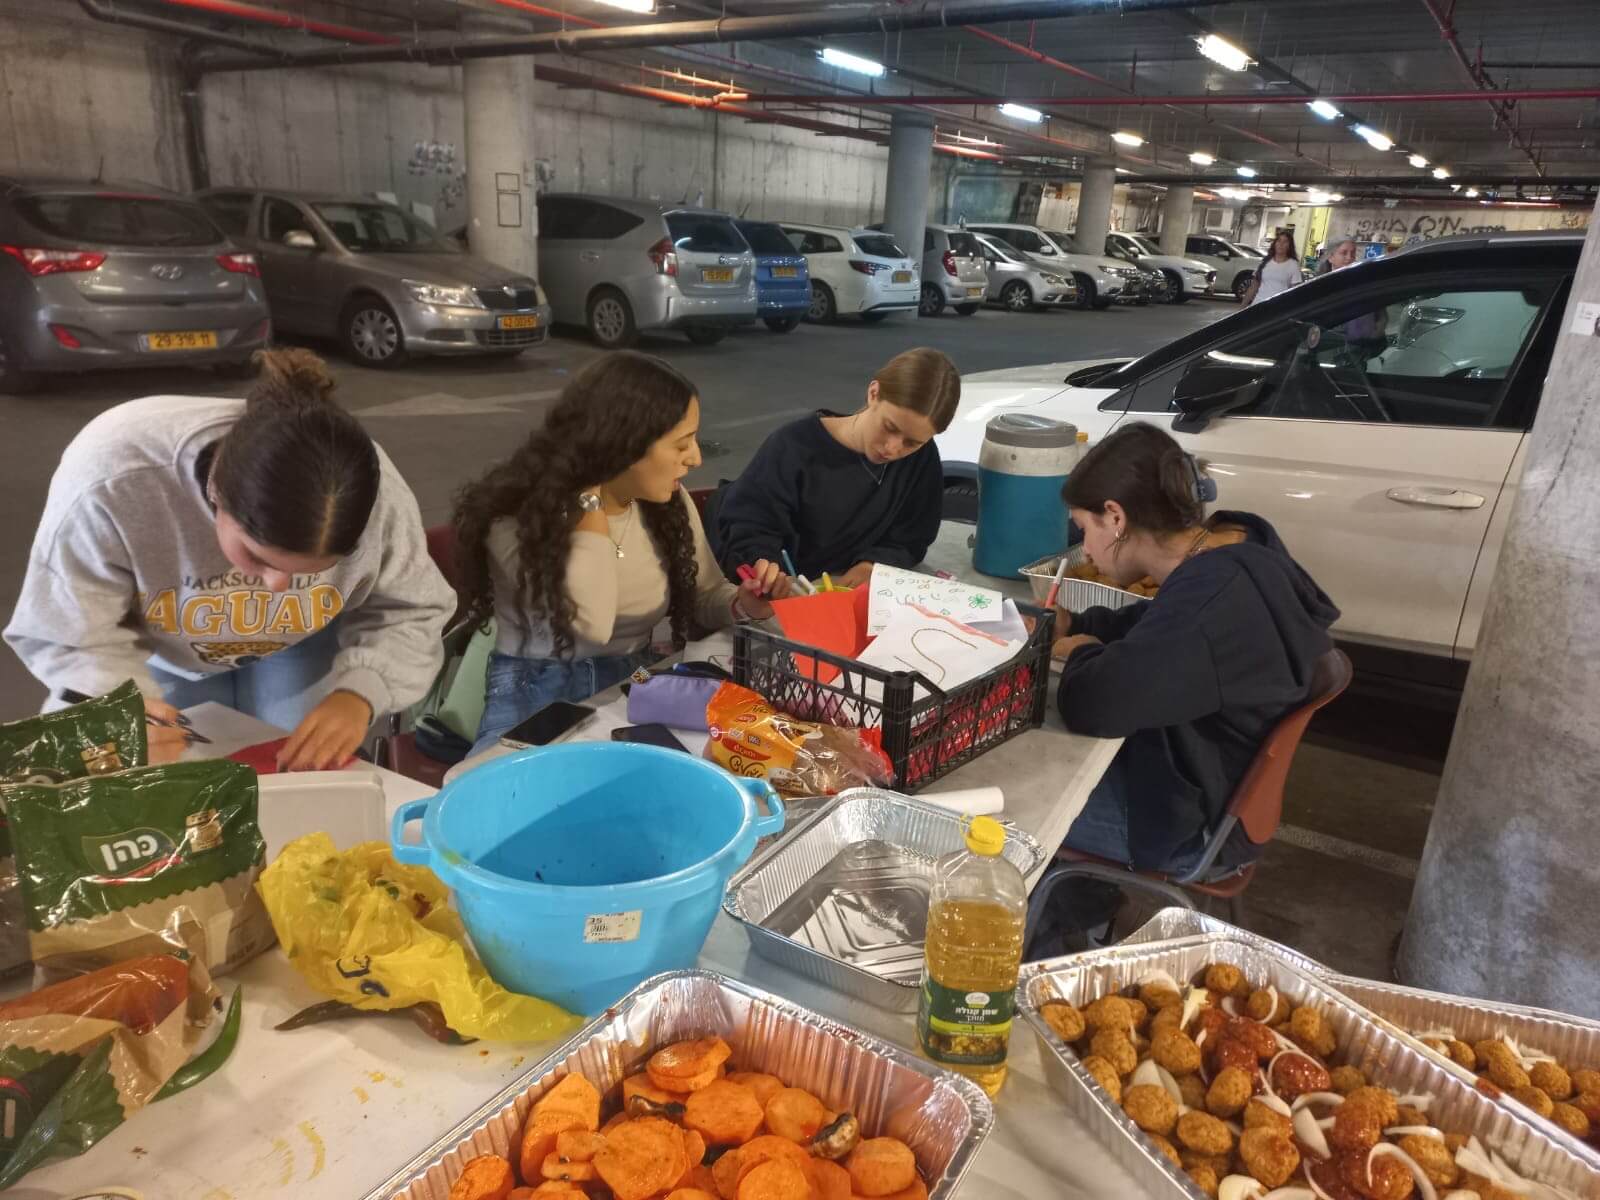 Students volunteer in their school's parking garage, which also is functioning as a kitchen.